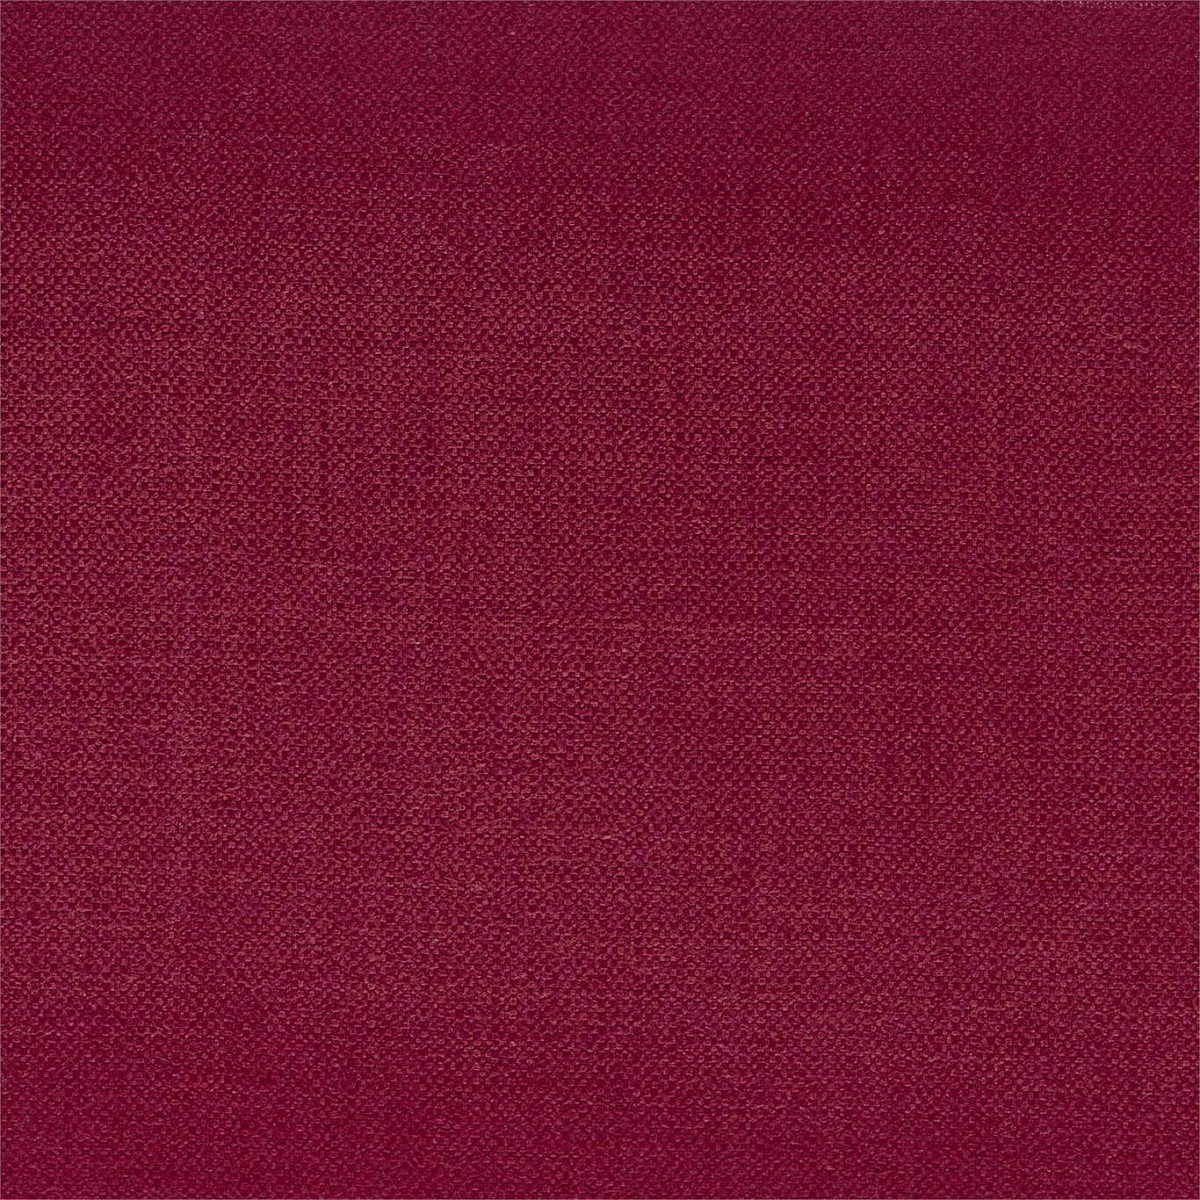 Lustre Bordeaux Fabric by Zoffany